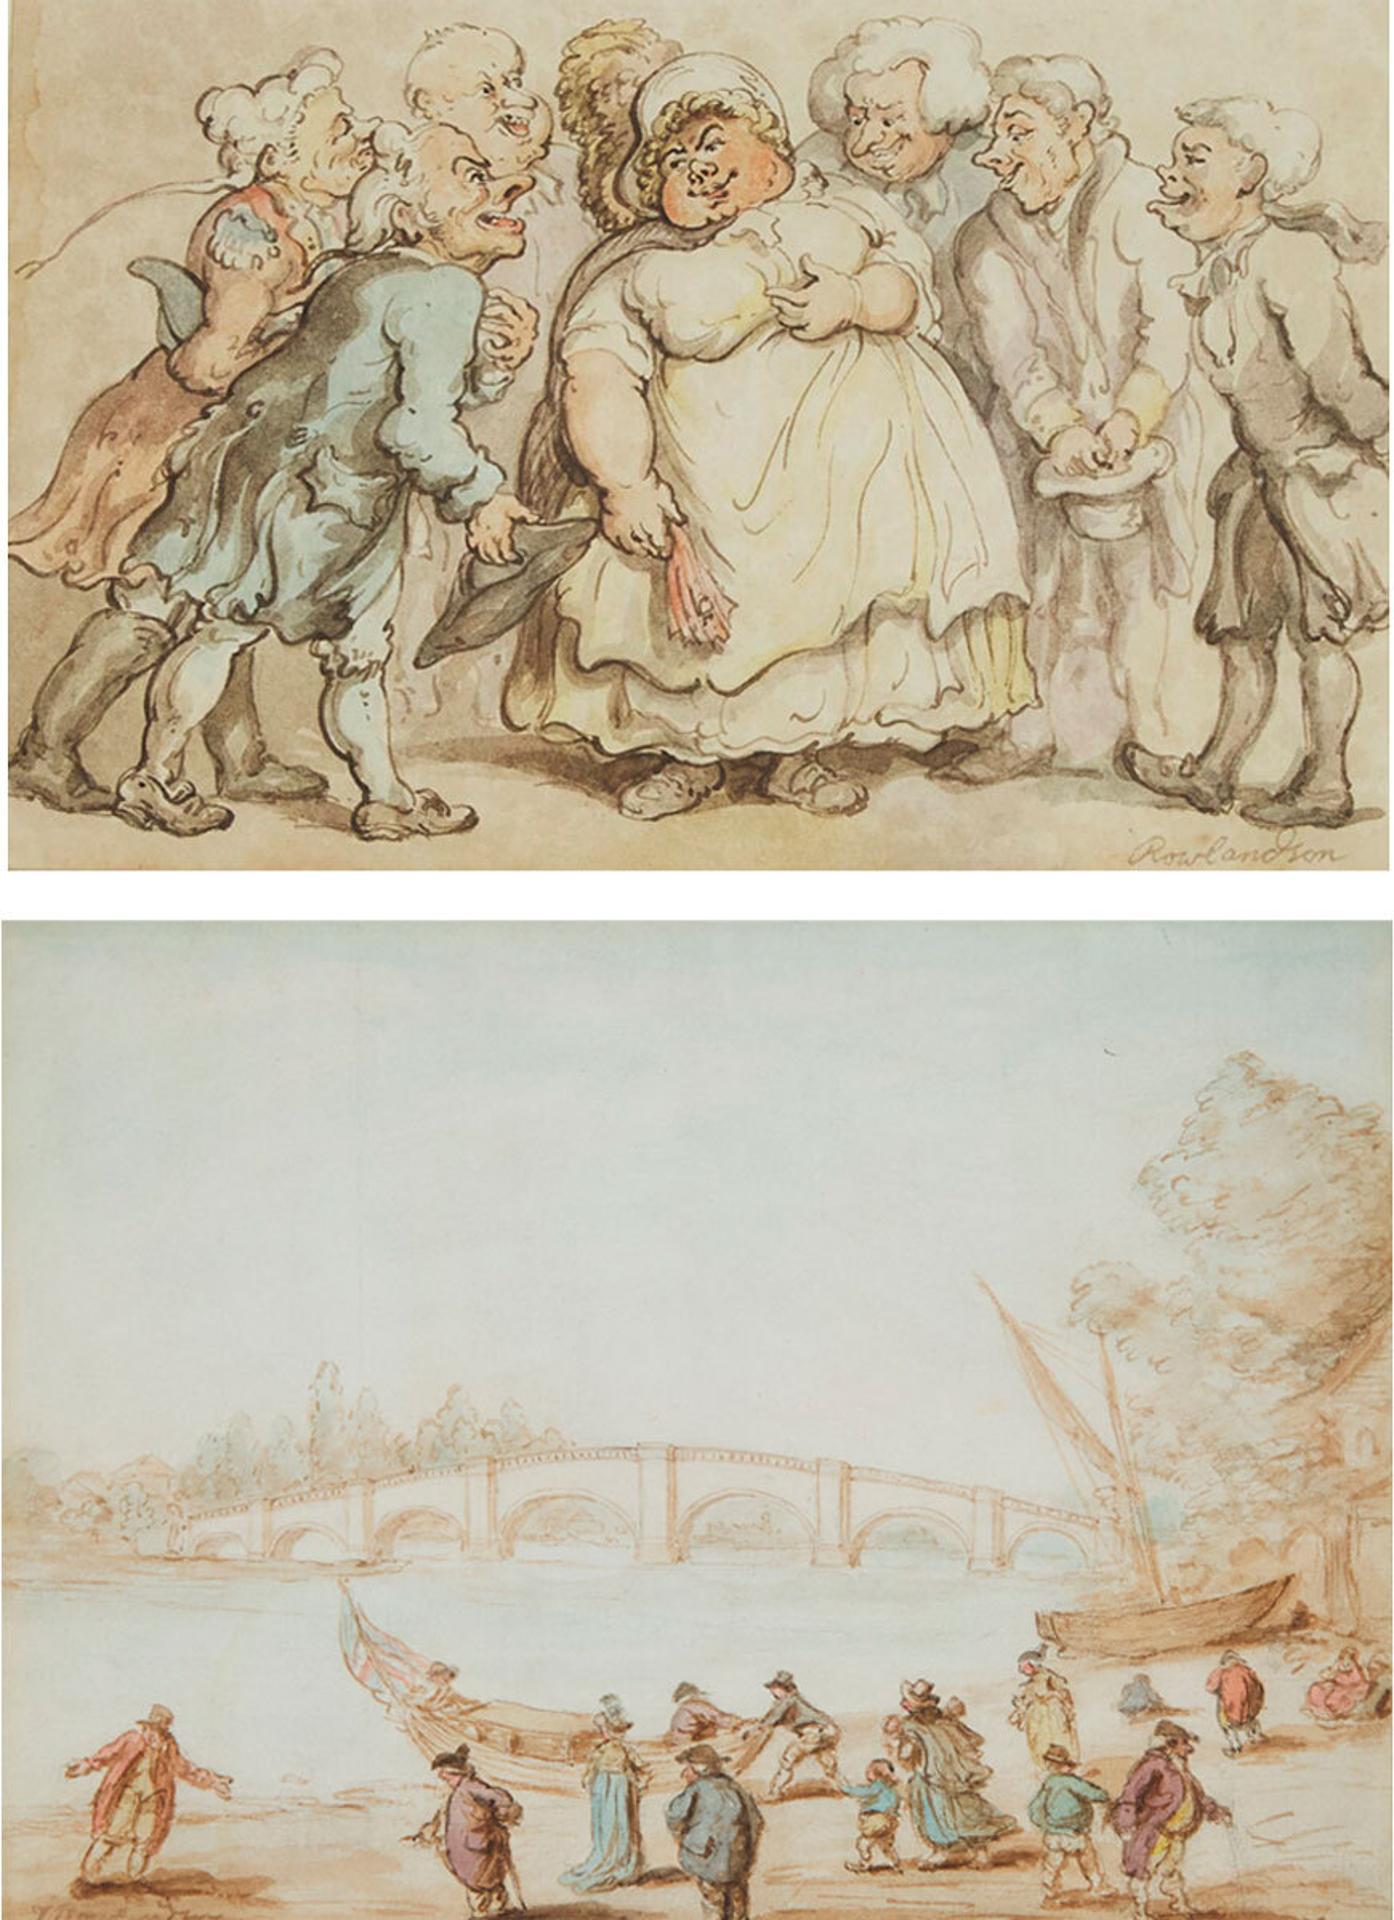 Thomas Rowlandson (1756-1827) - Men Surrounding A Robust Maiden; Figures On Shore Pushing A Boat